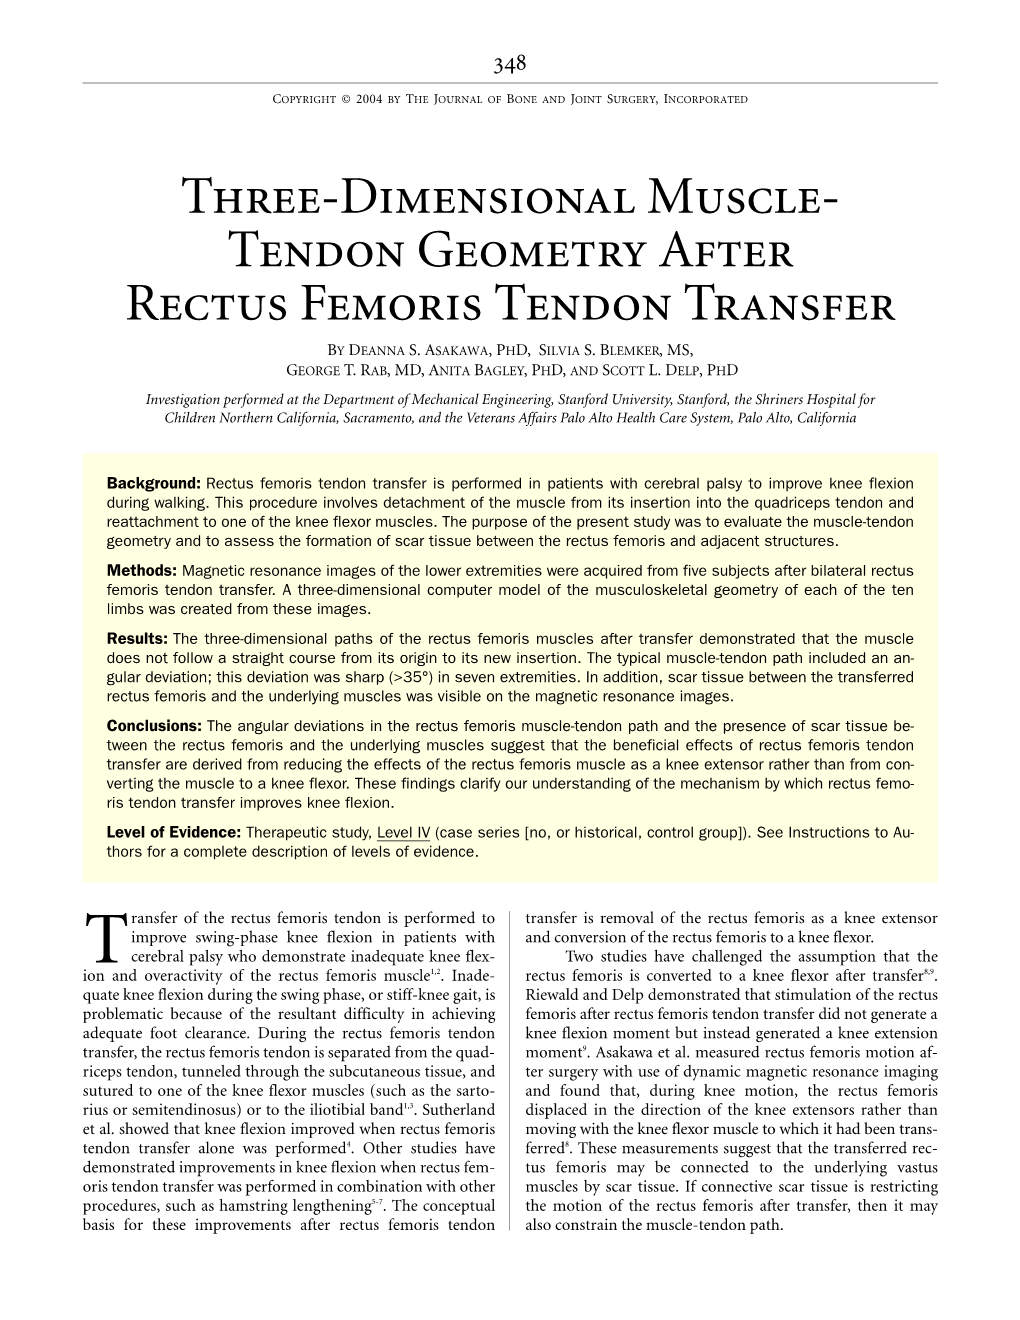 Tendon Geometry After Rectus Femoris Tendon Transfer by DEANNA S